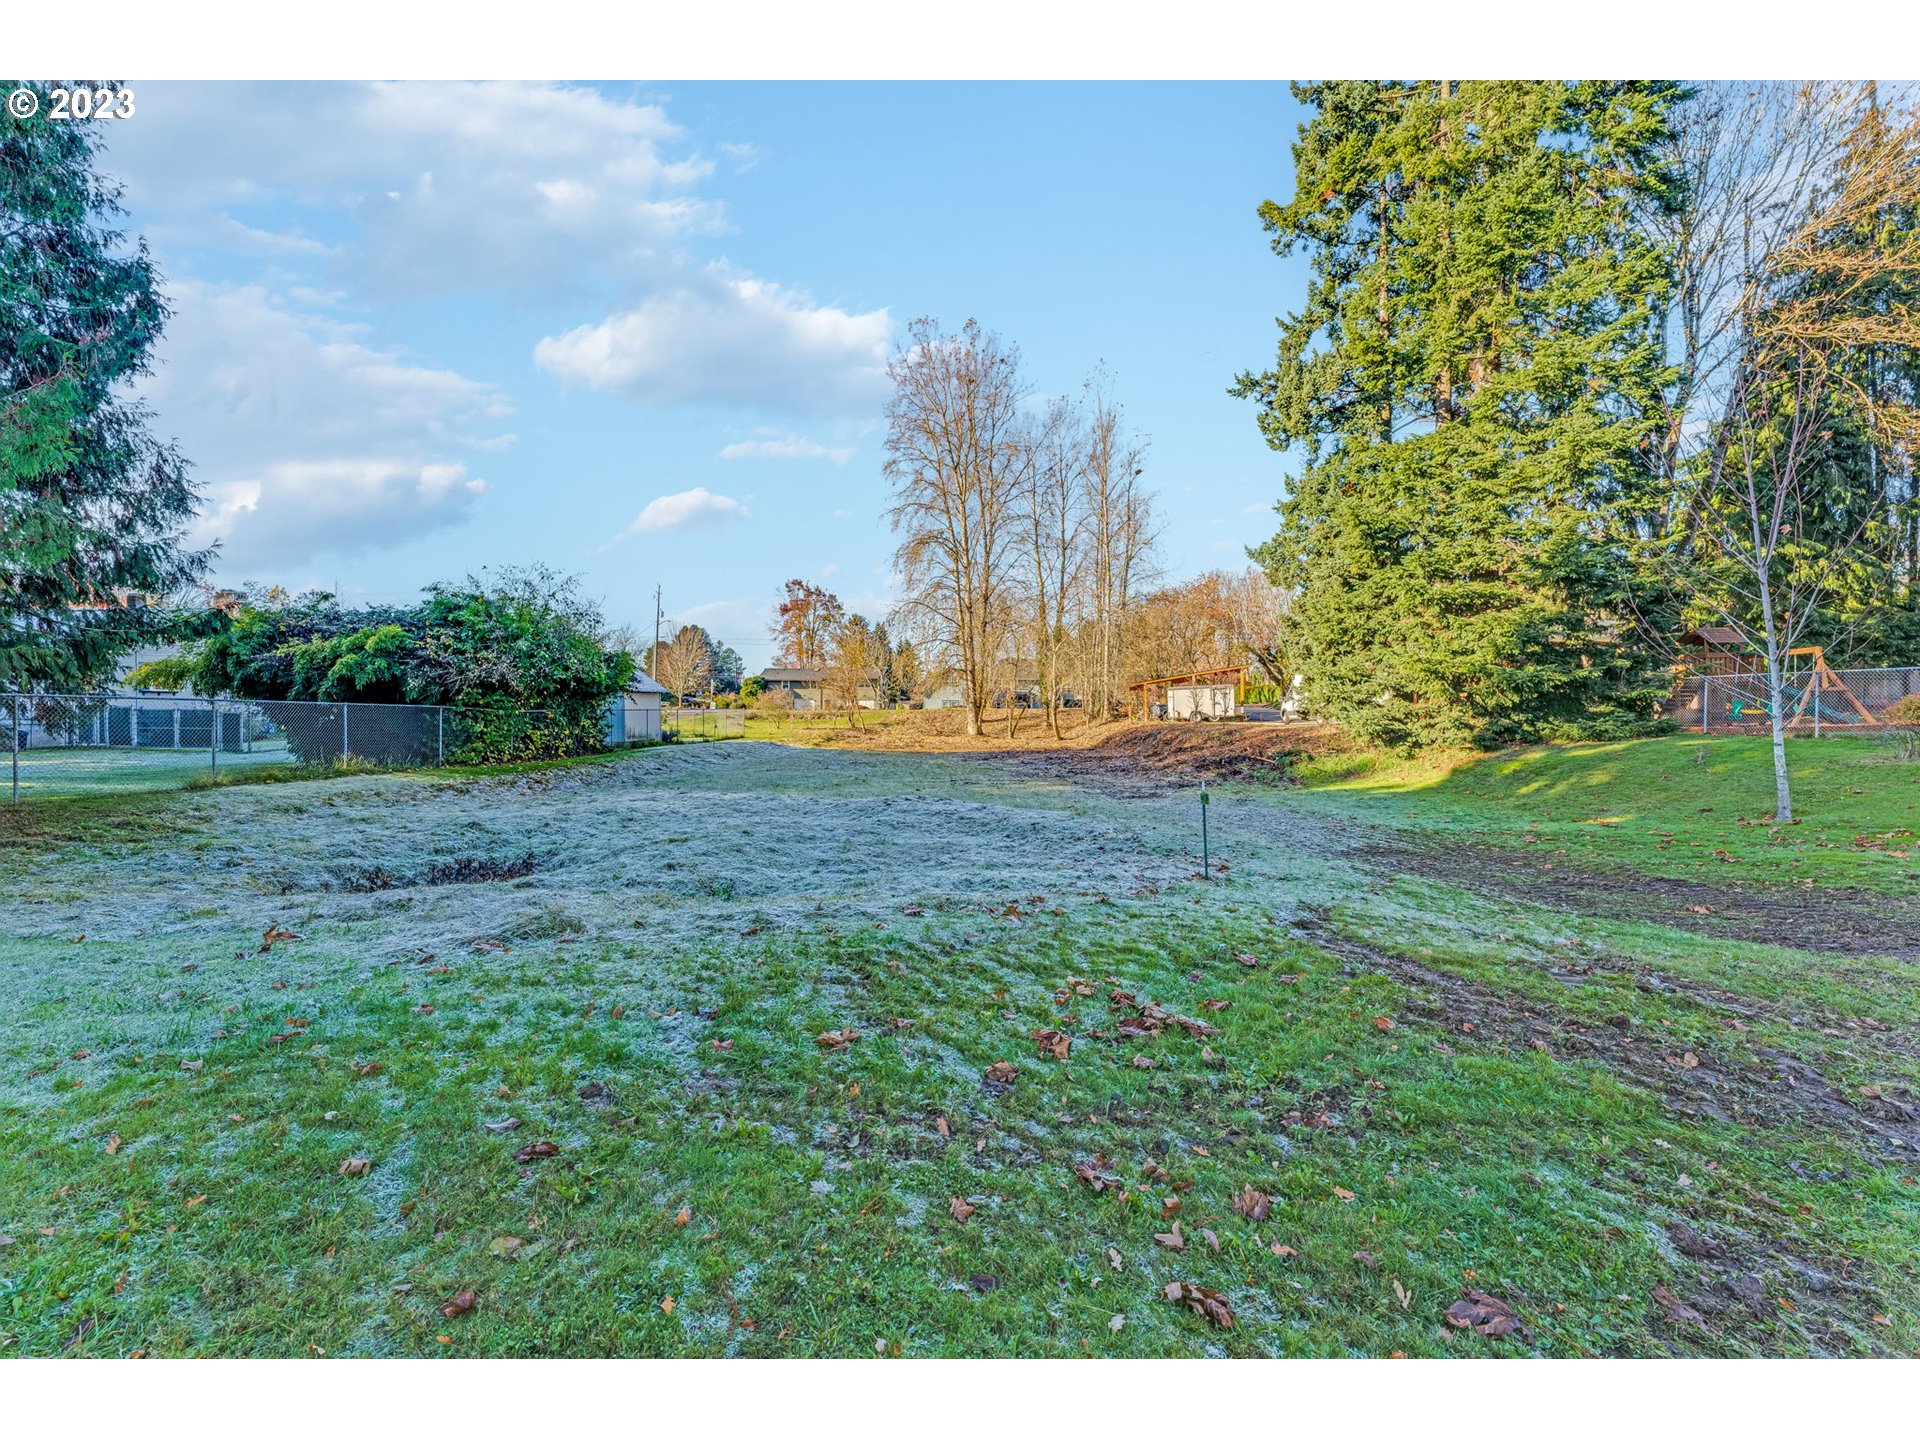 NW 20th Ave , Vancouver, WA 98665